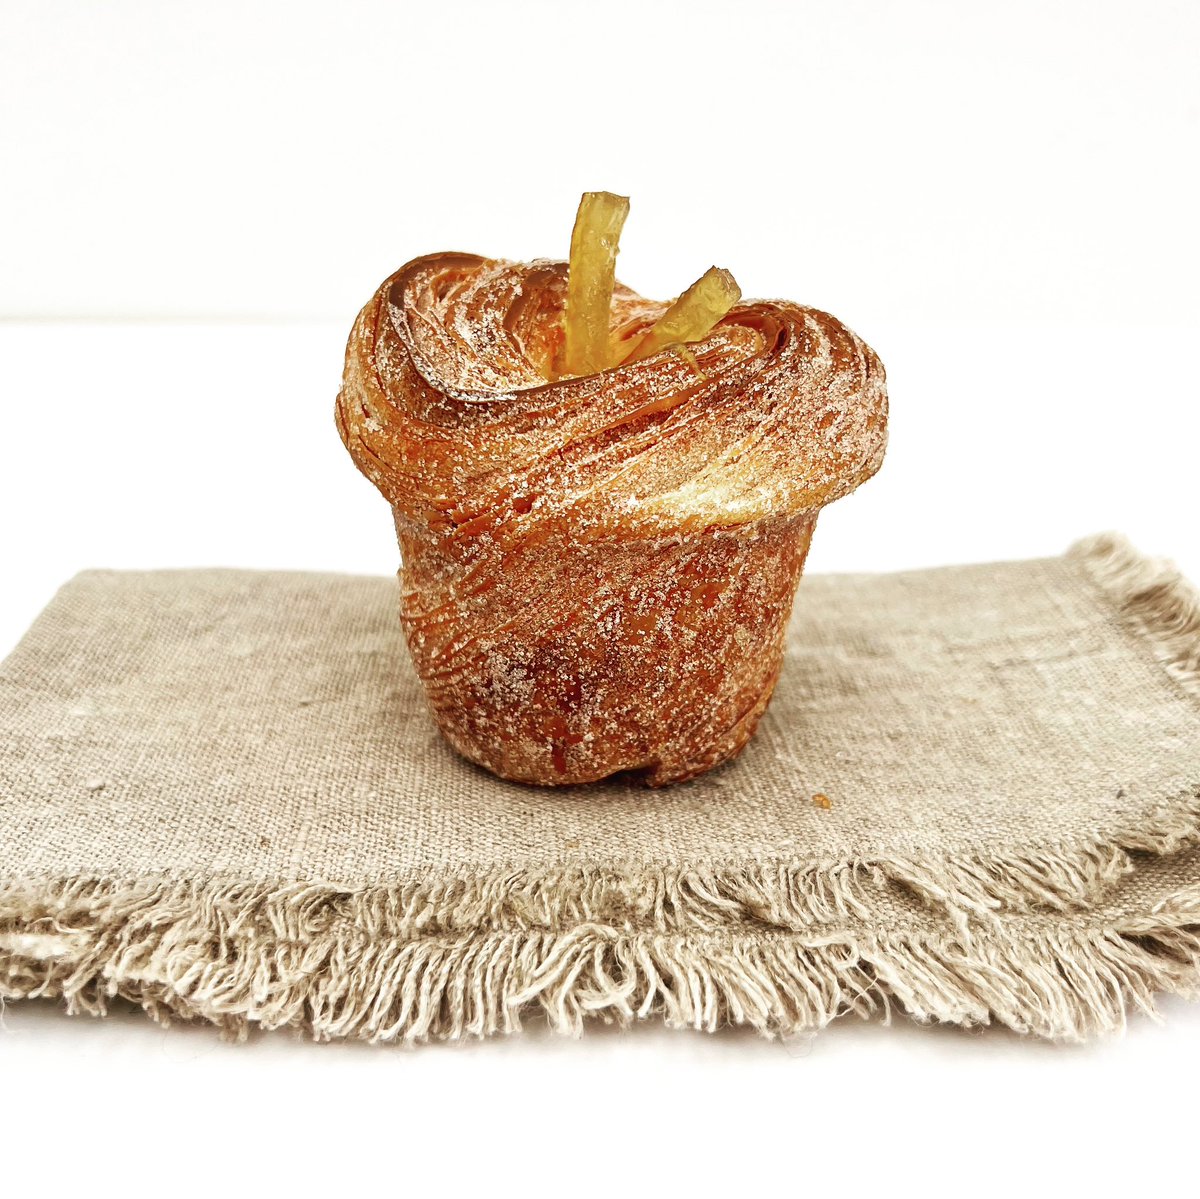 Do you know the “cruffin man” 😊 do you know the “cruffin man”…. 🎤🎼 

Our brand new Lemon Cruffin (the new croissant/muffin) you are going to love 💕 #cruffin  #lemoncruffin #new 
#doyouknowthecruffinman 

#healthybread #artisanbread #freshbread  #wellbread #noadditives